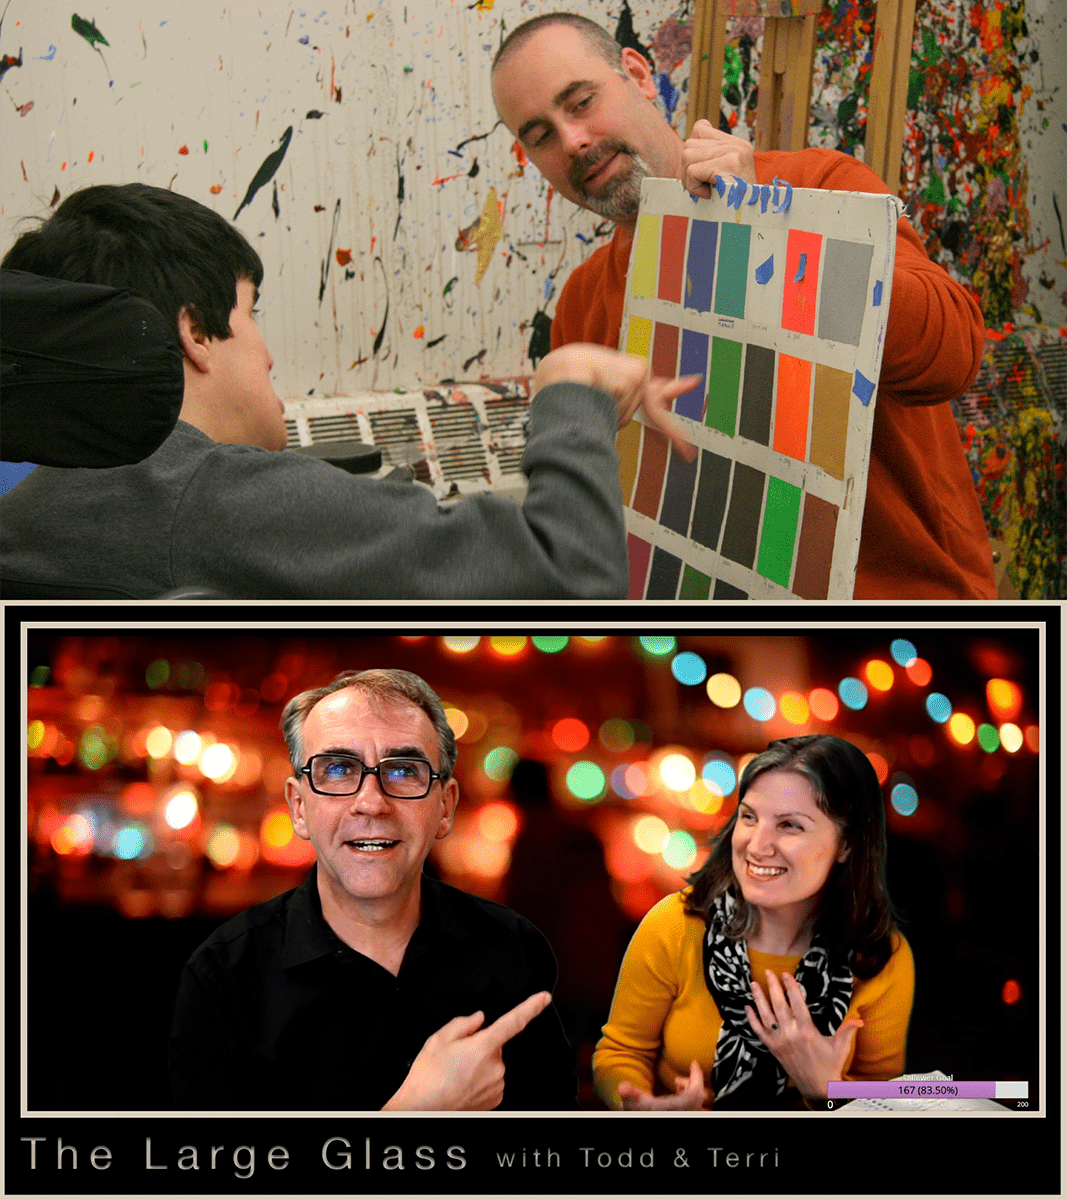 Artist Karen Frascella featured in an episode of The Large Glass with Todd & Terri.